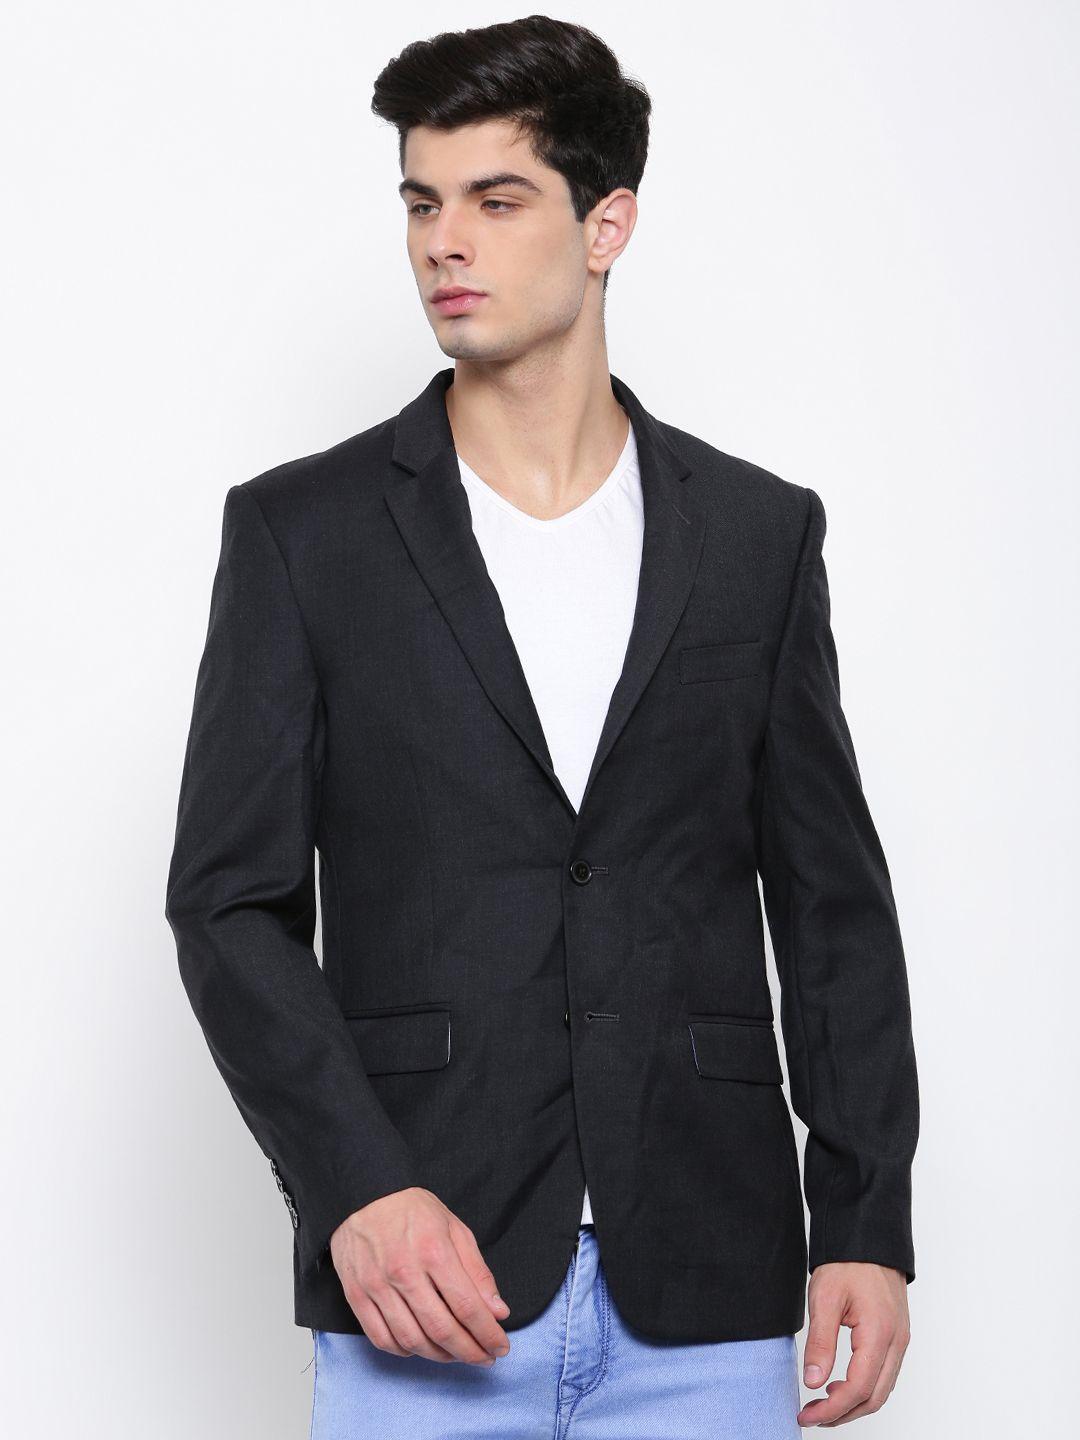 u.s. polo assn. charcoal grey regular fit single-breasted smart casual blazer